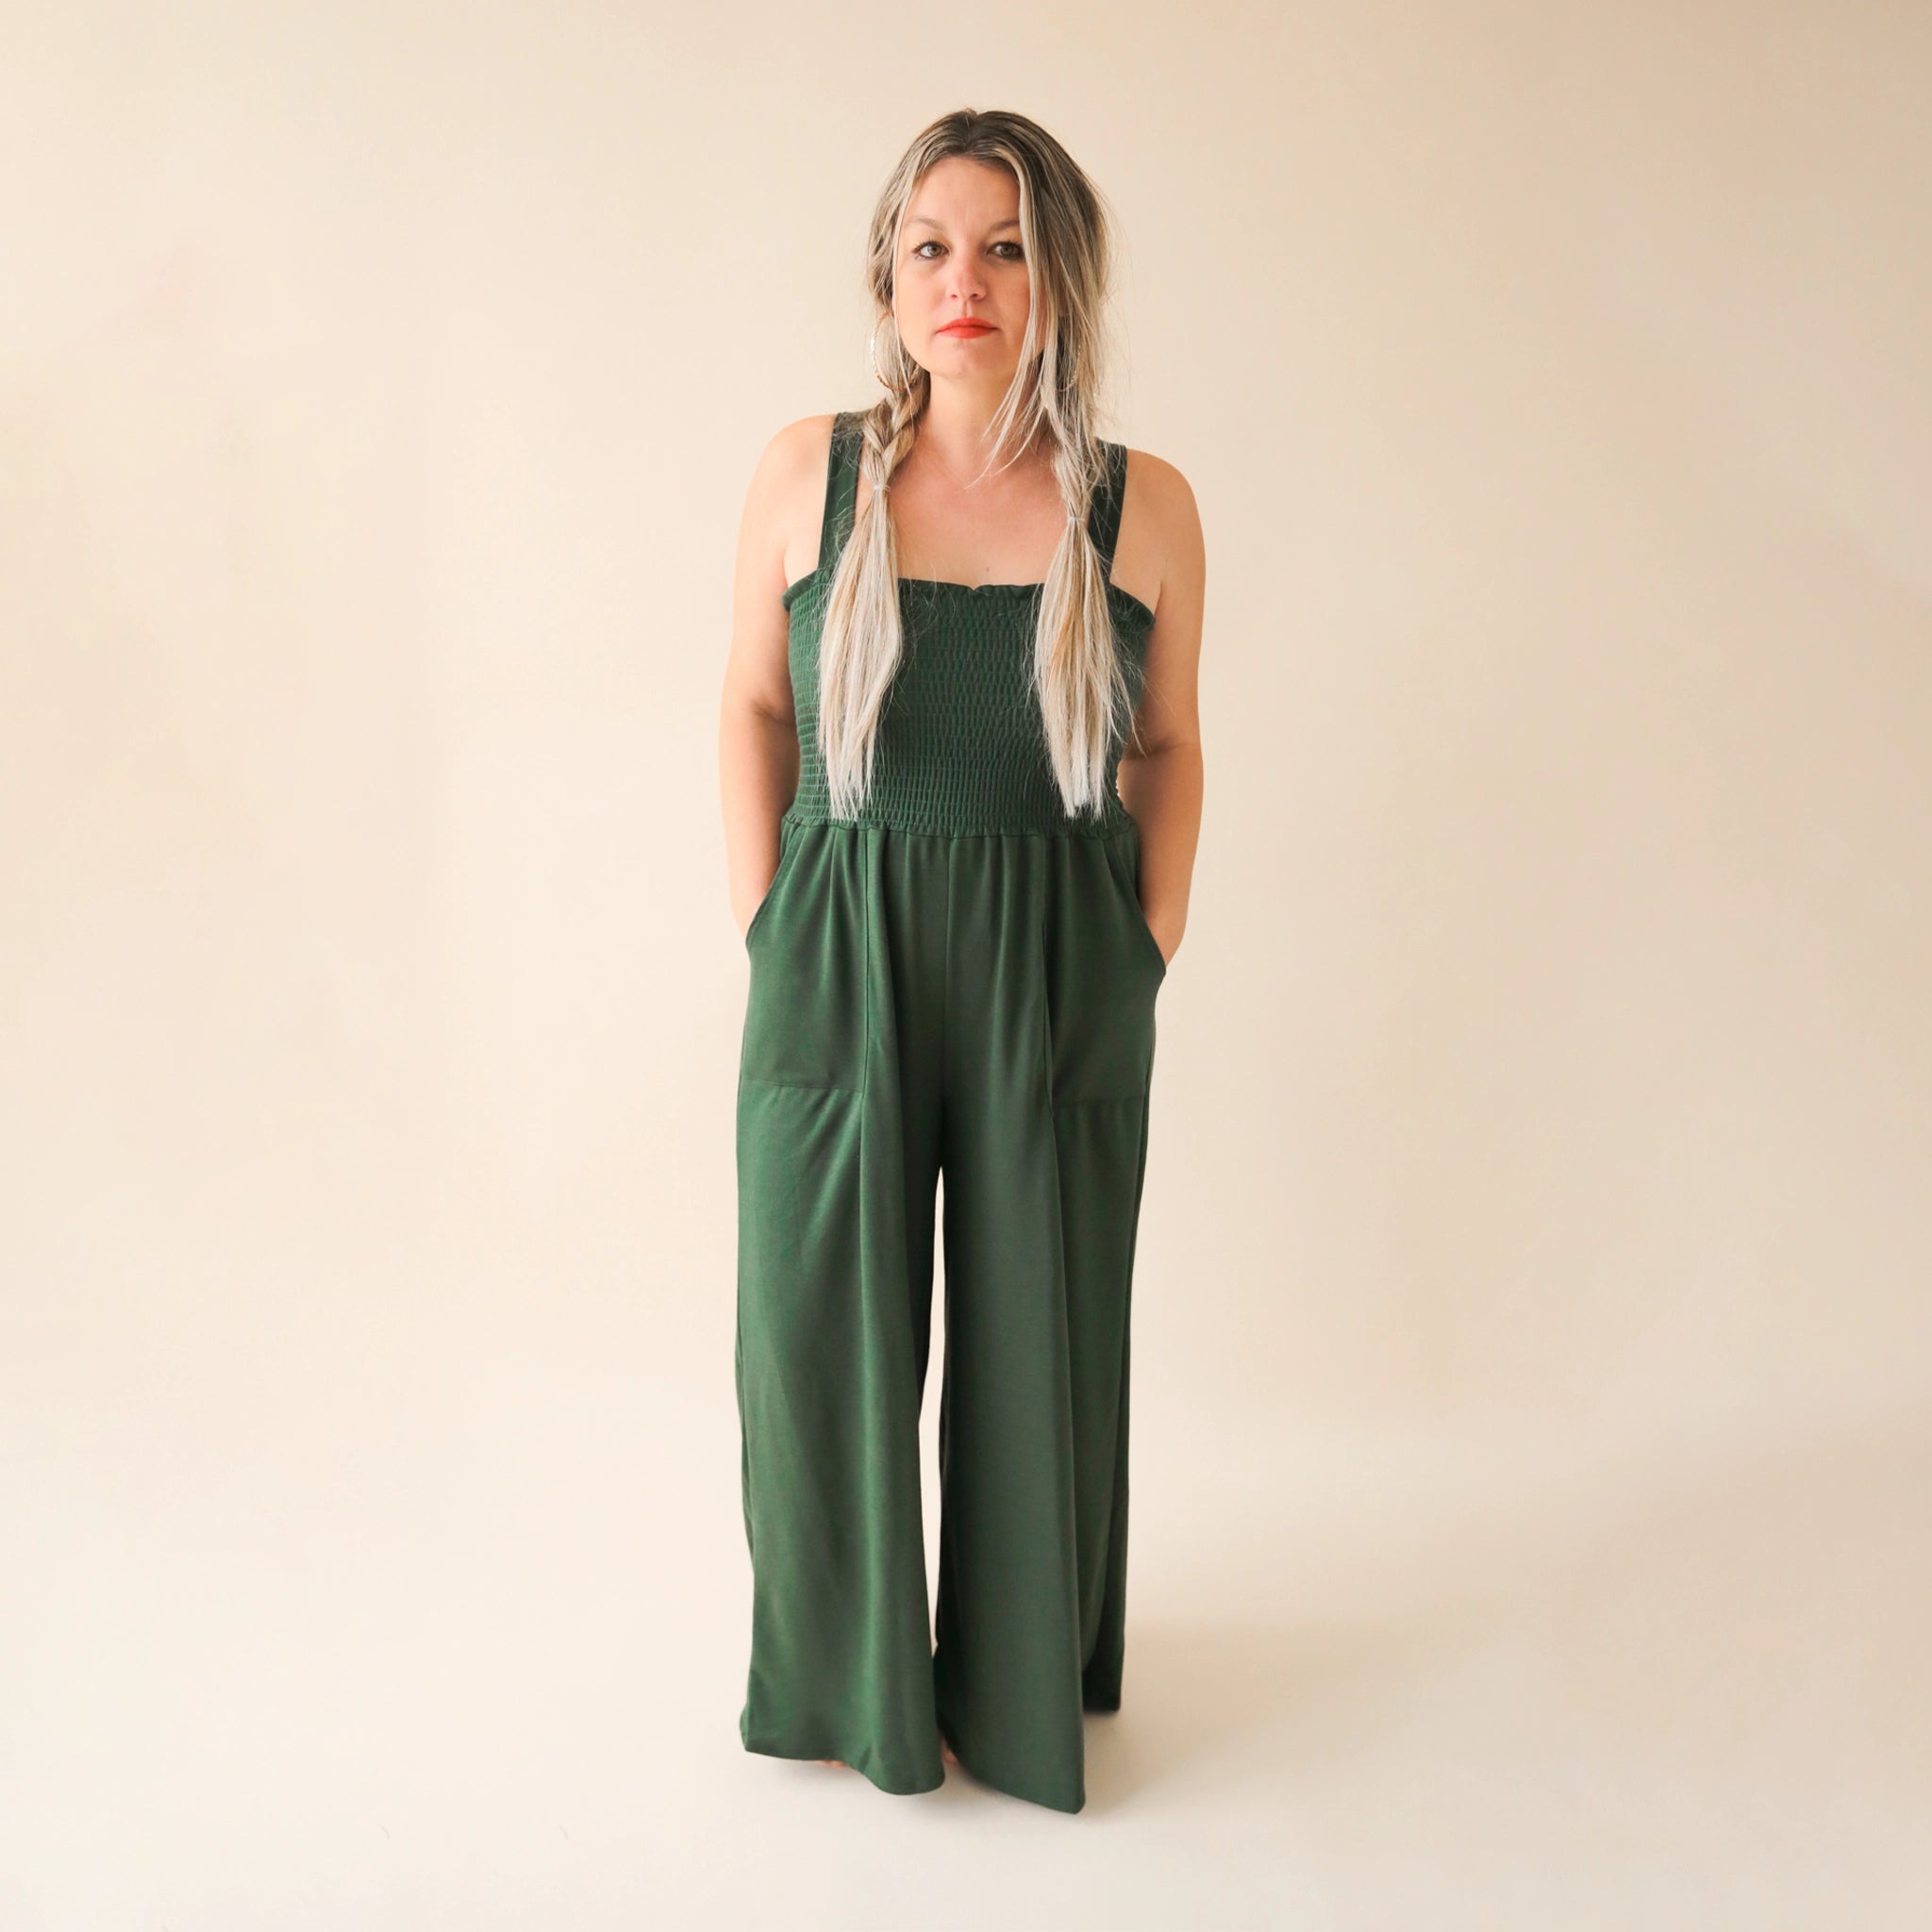 On a cream background is a model wearing a hunter green wide leg jumpsuit with large pockets and 1.5" shoulder straps.